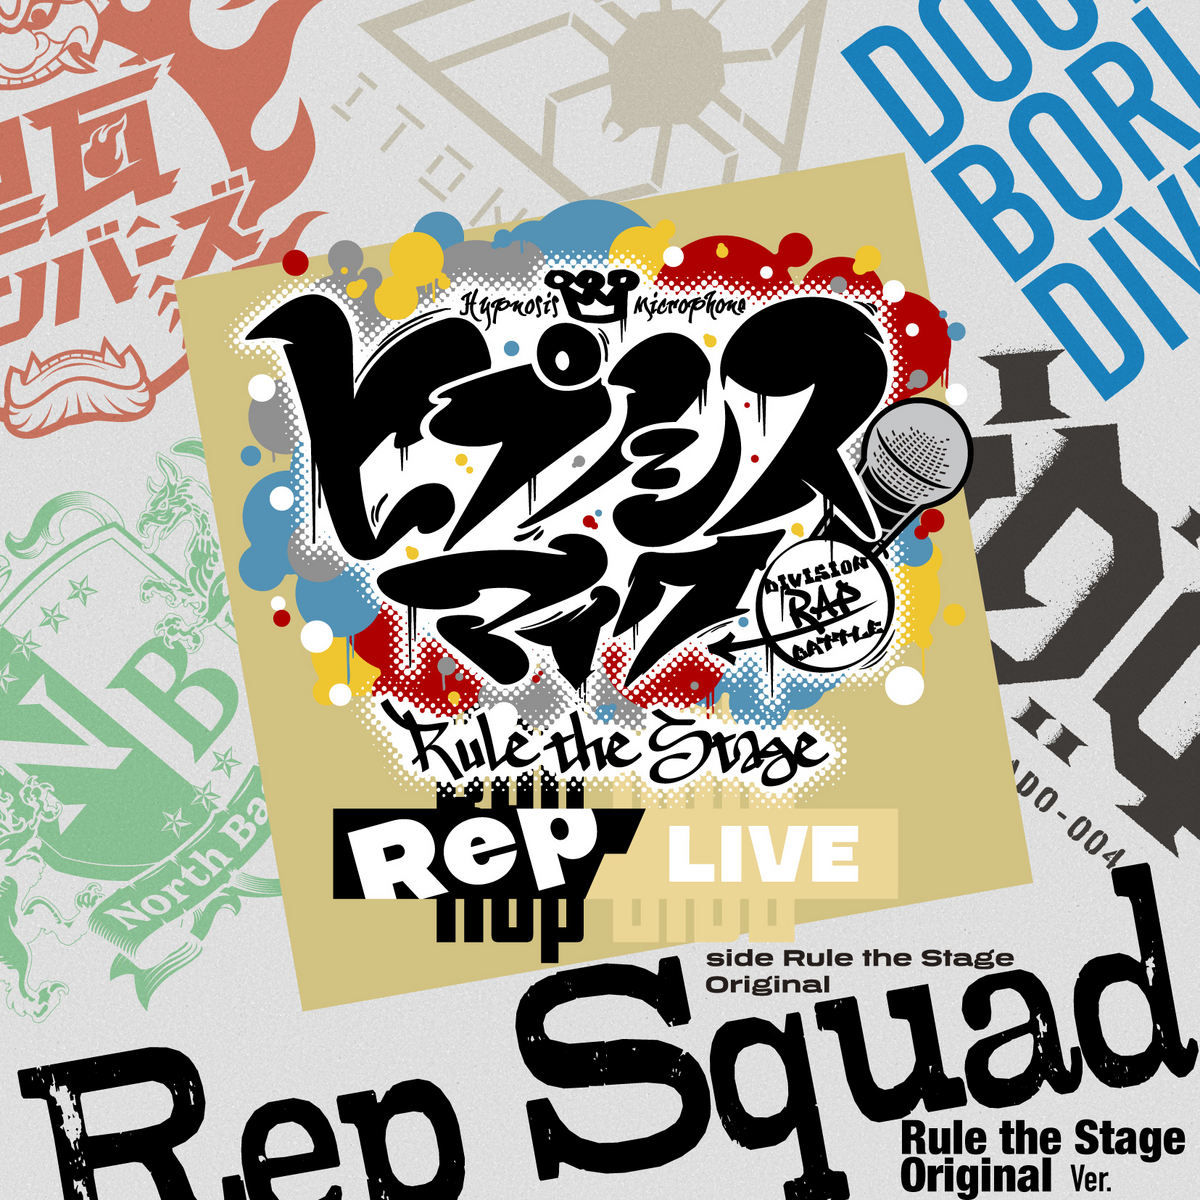 Rep Squad -Rule the Stage Original Ver.- | Hypnosis Mic Wiki | Fandom